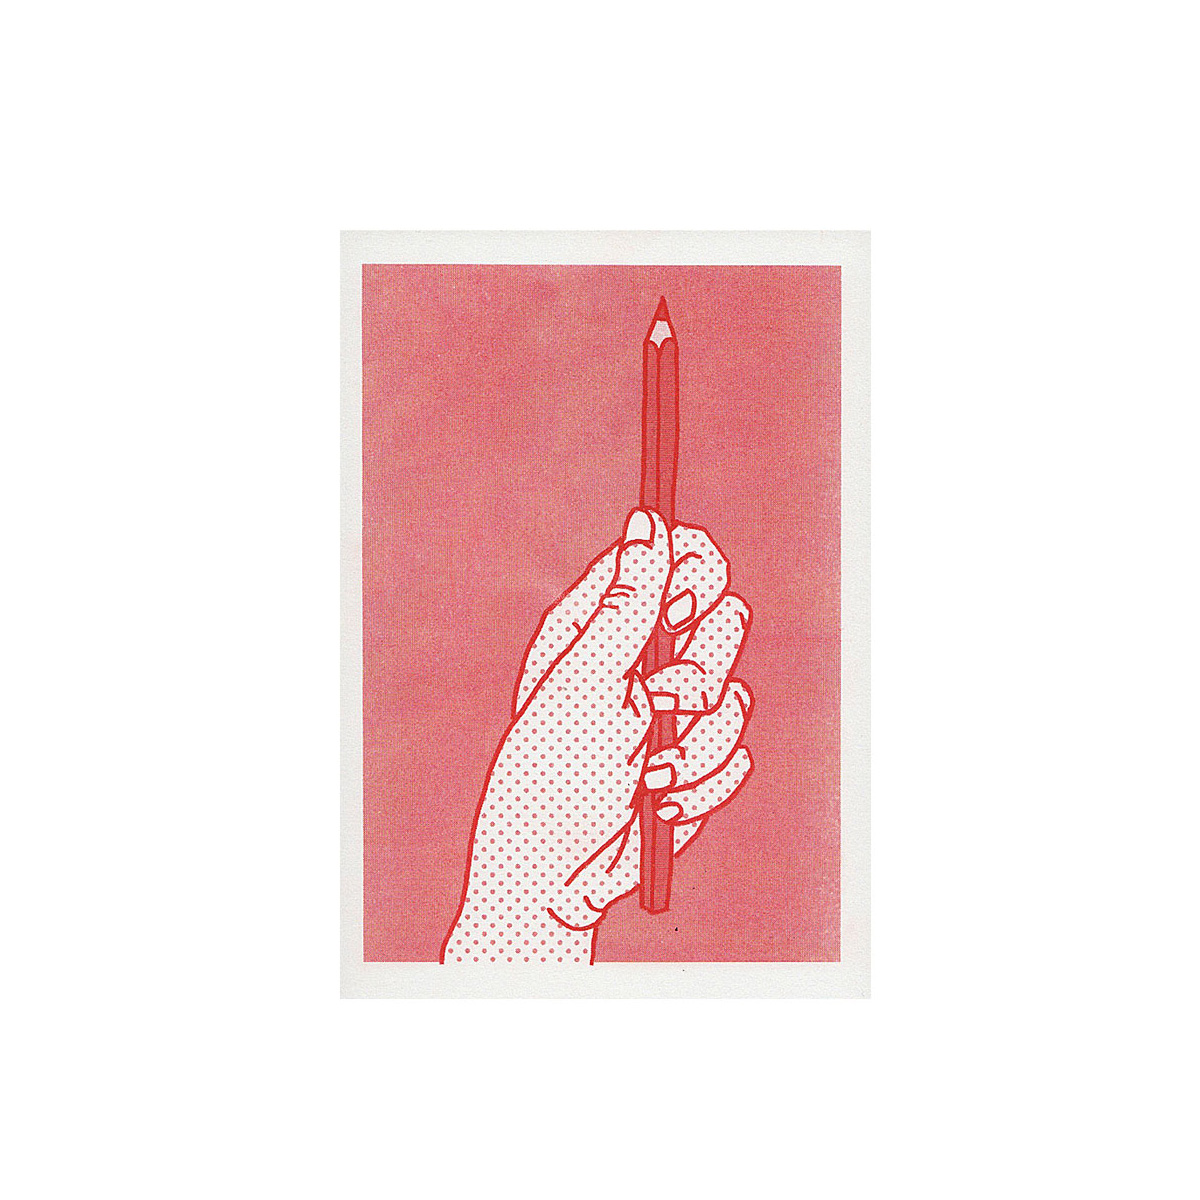 red riso print of a hand holding a pencil